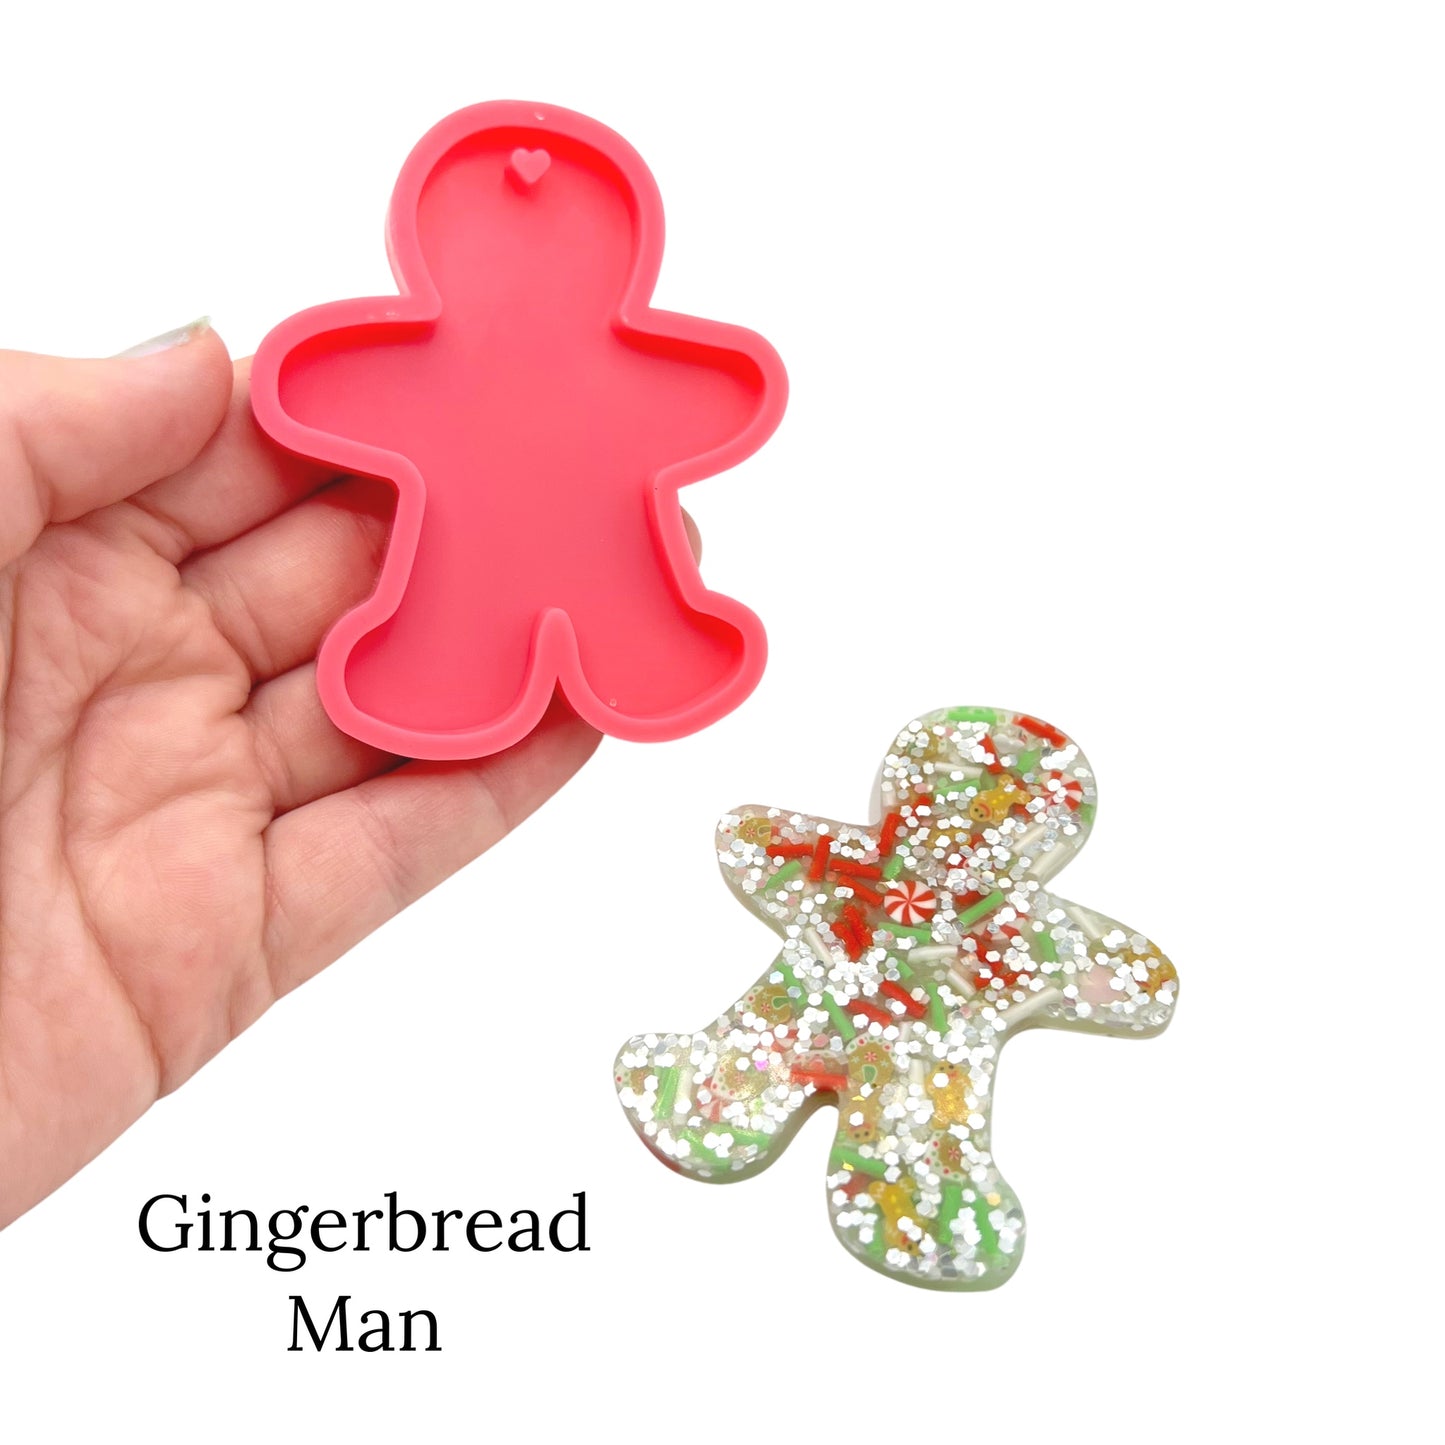 Sparkly gingerbread molds on a white background